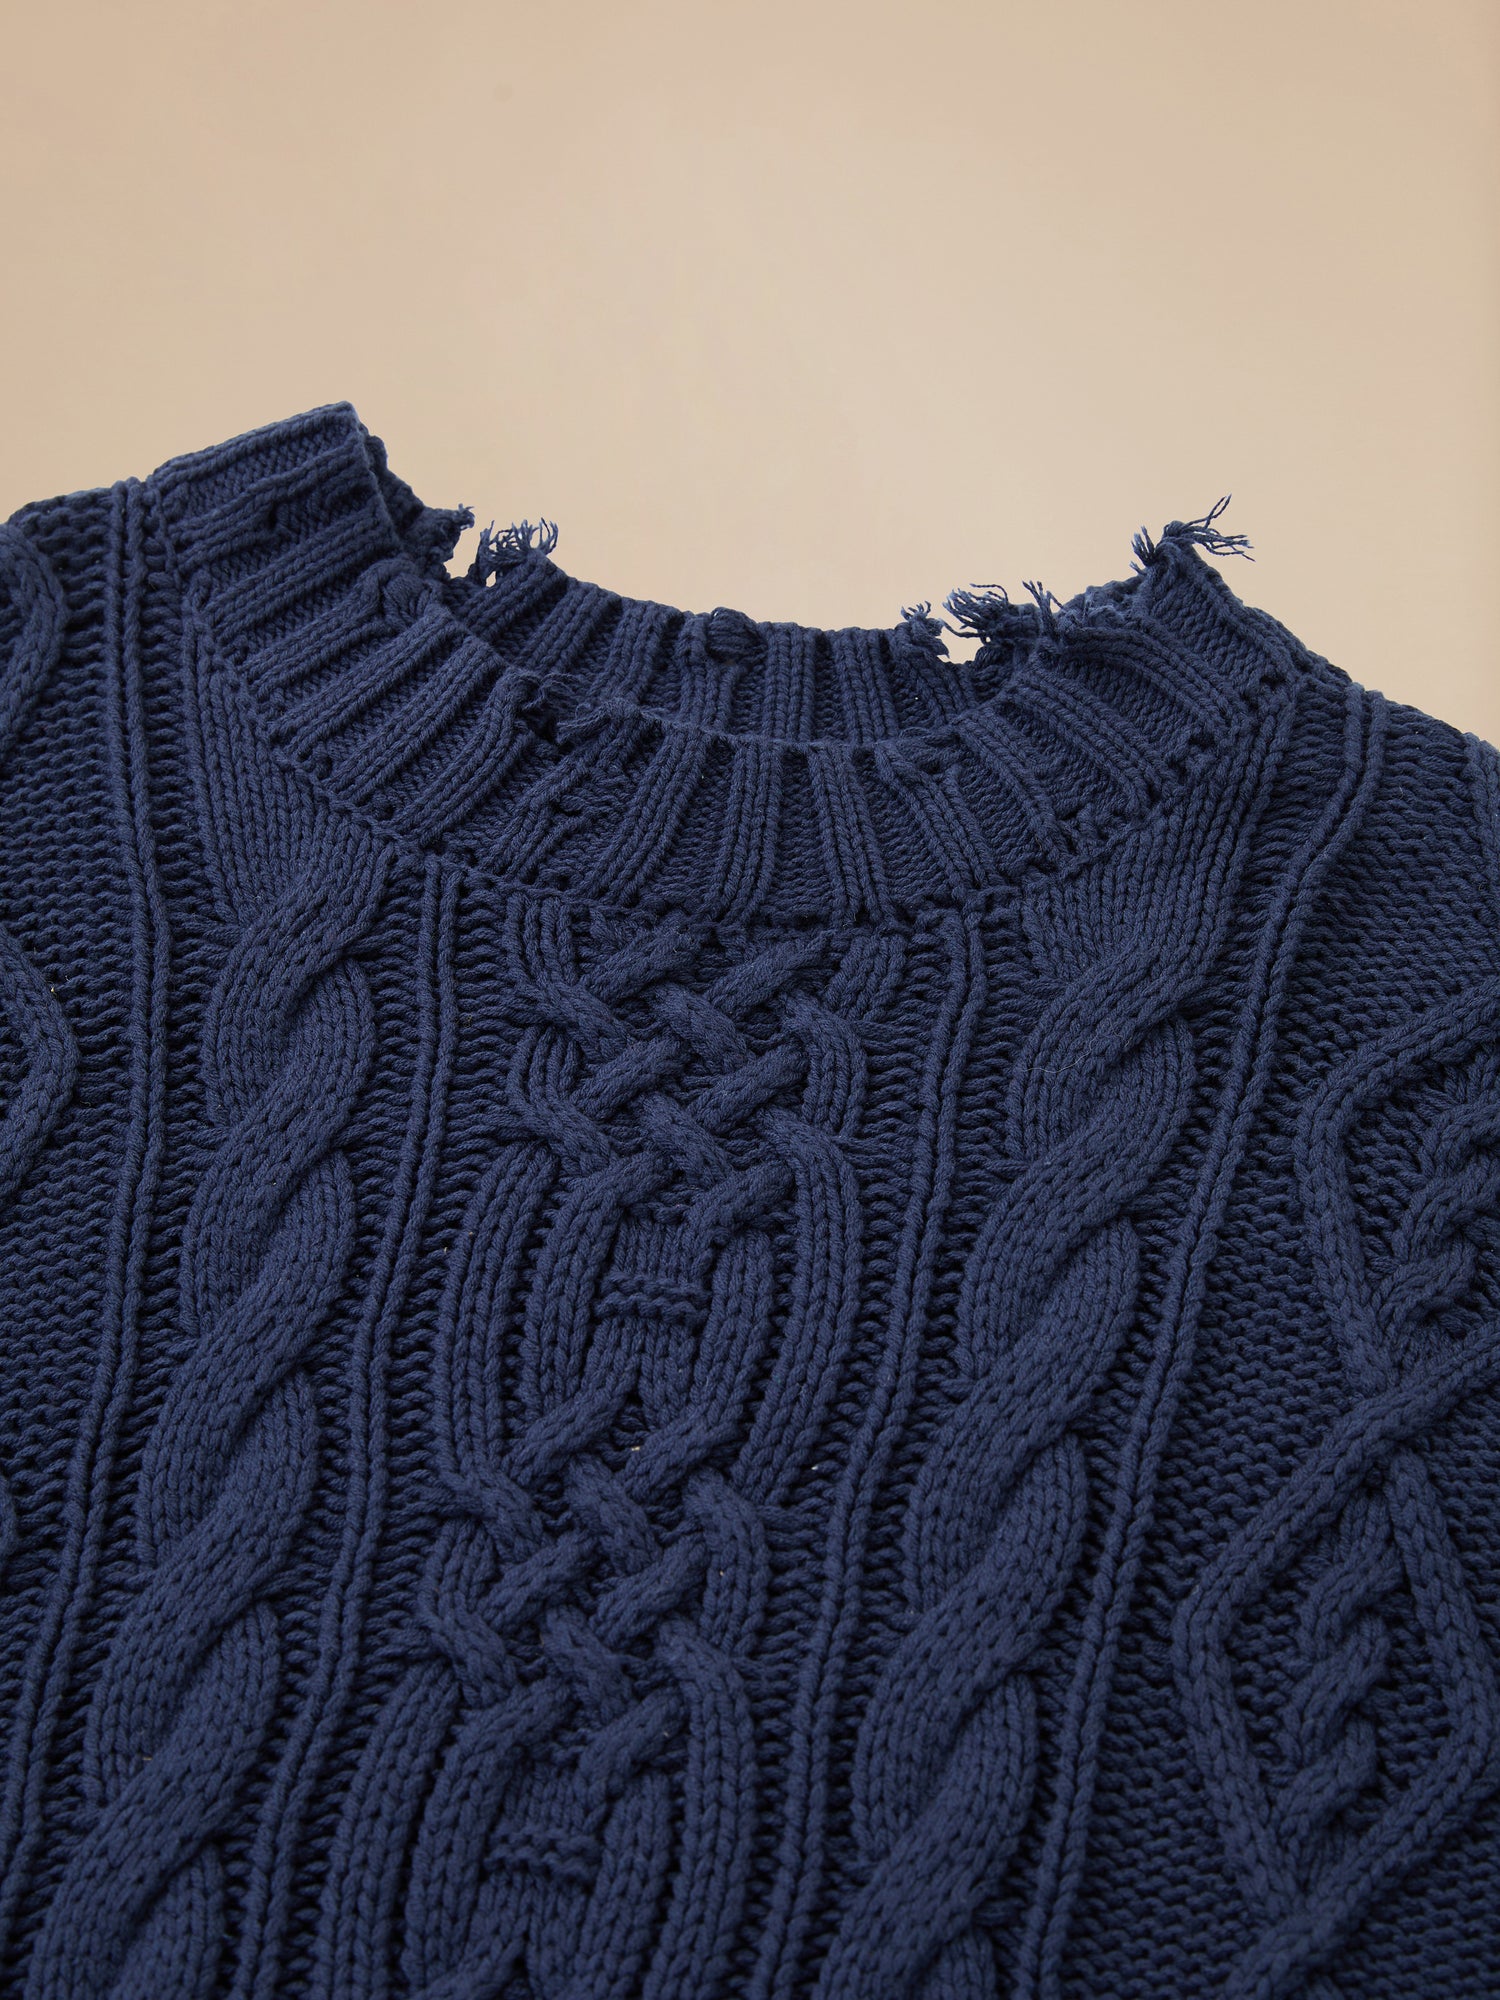 A close up of a Found Astral Distressed Cable Knit Sweater in navy - gallery image 5.